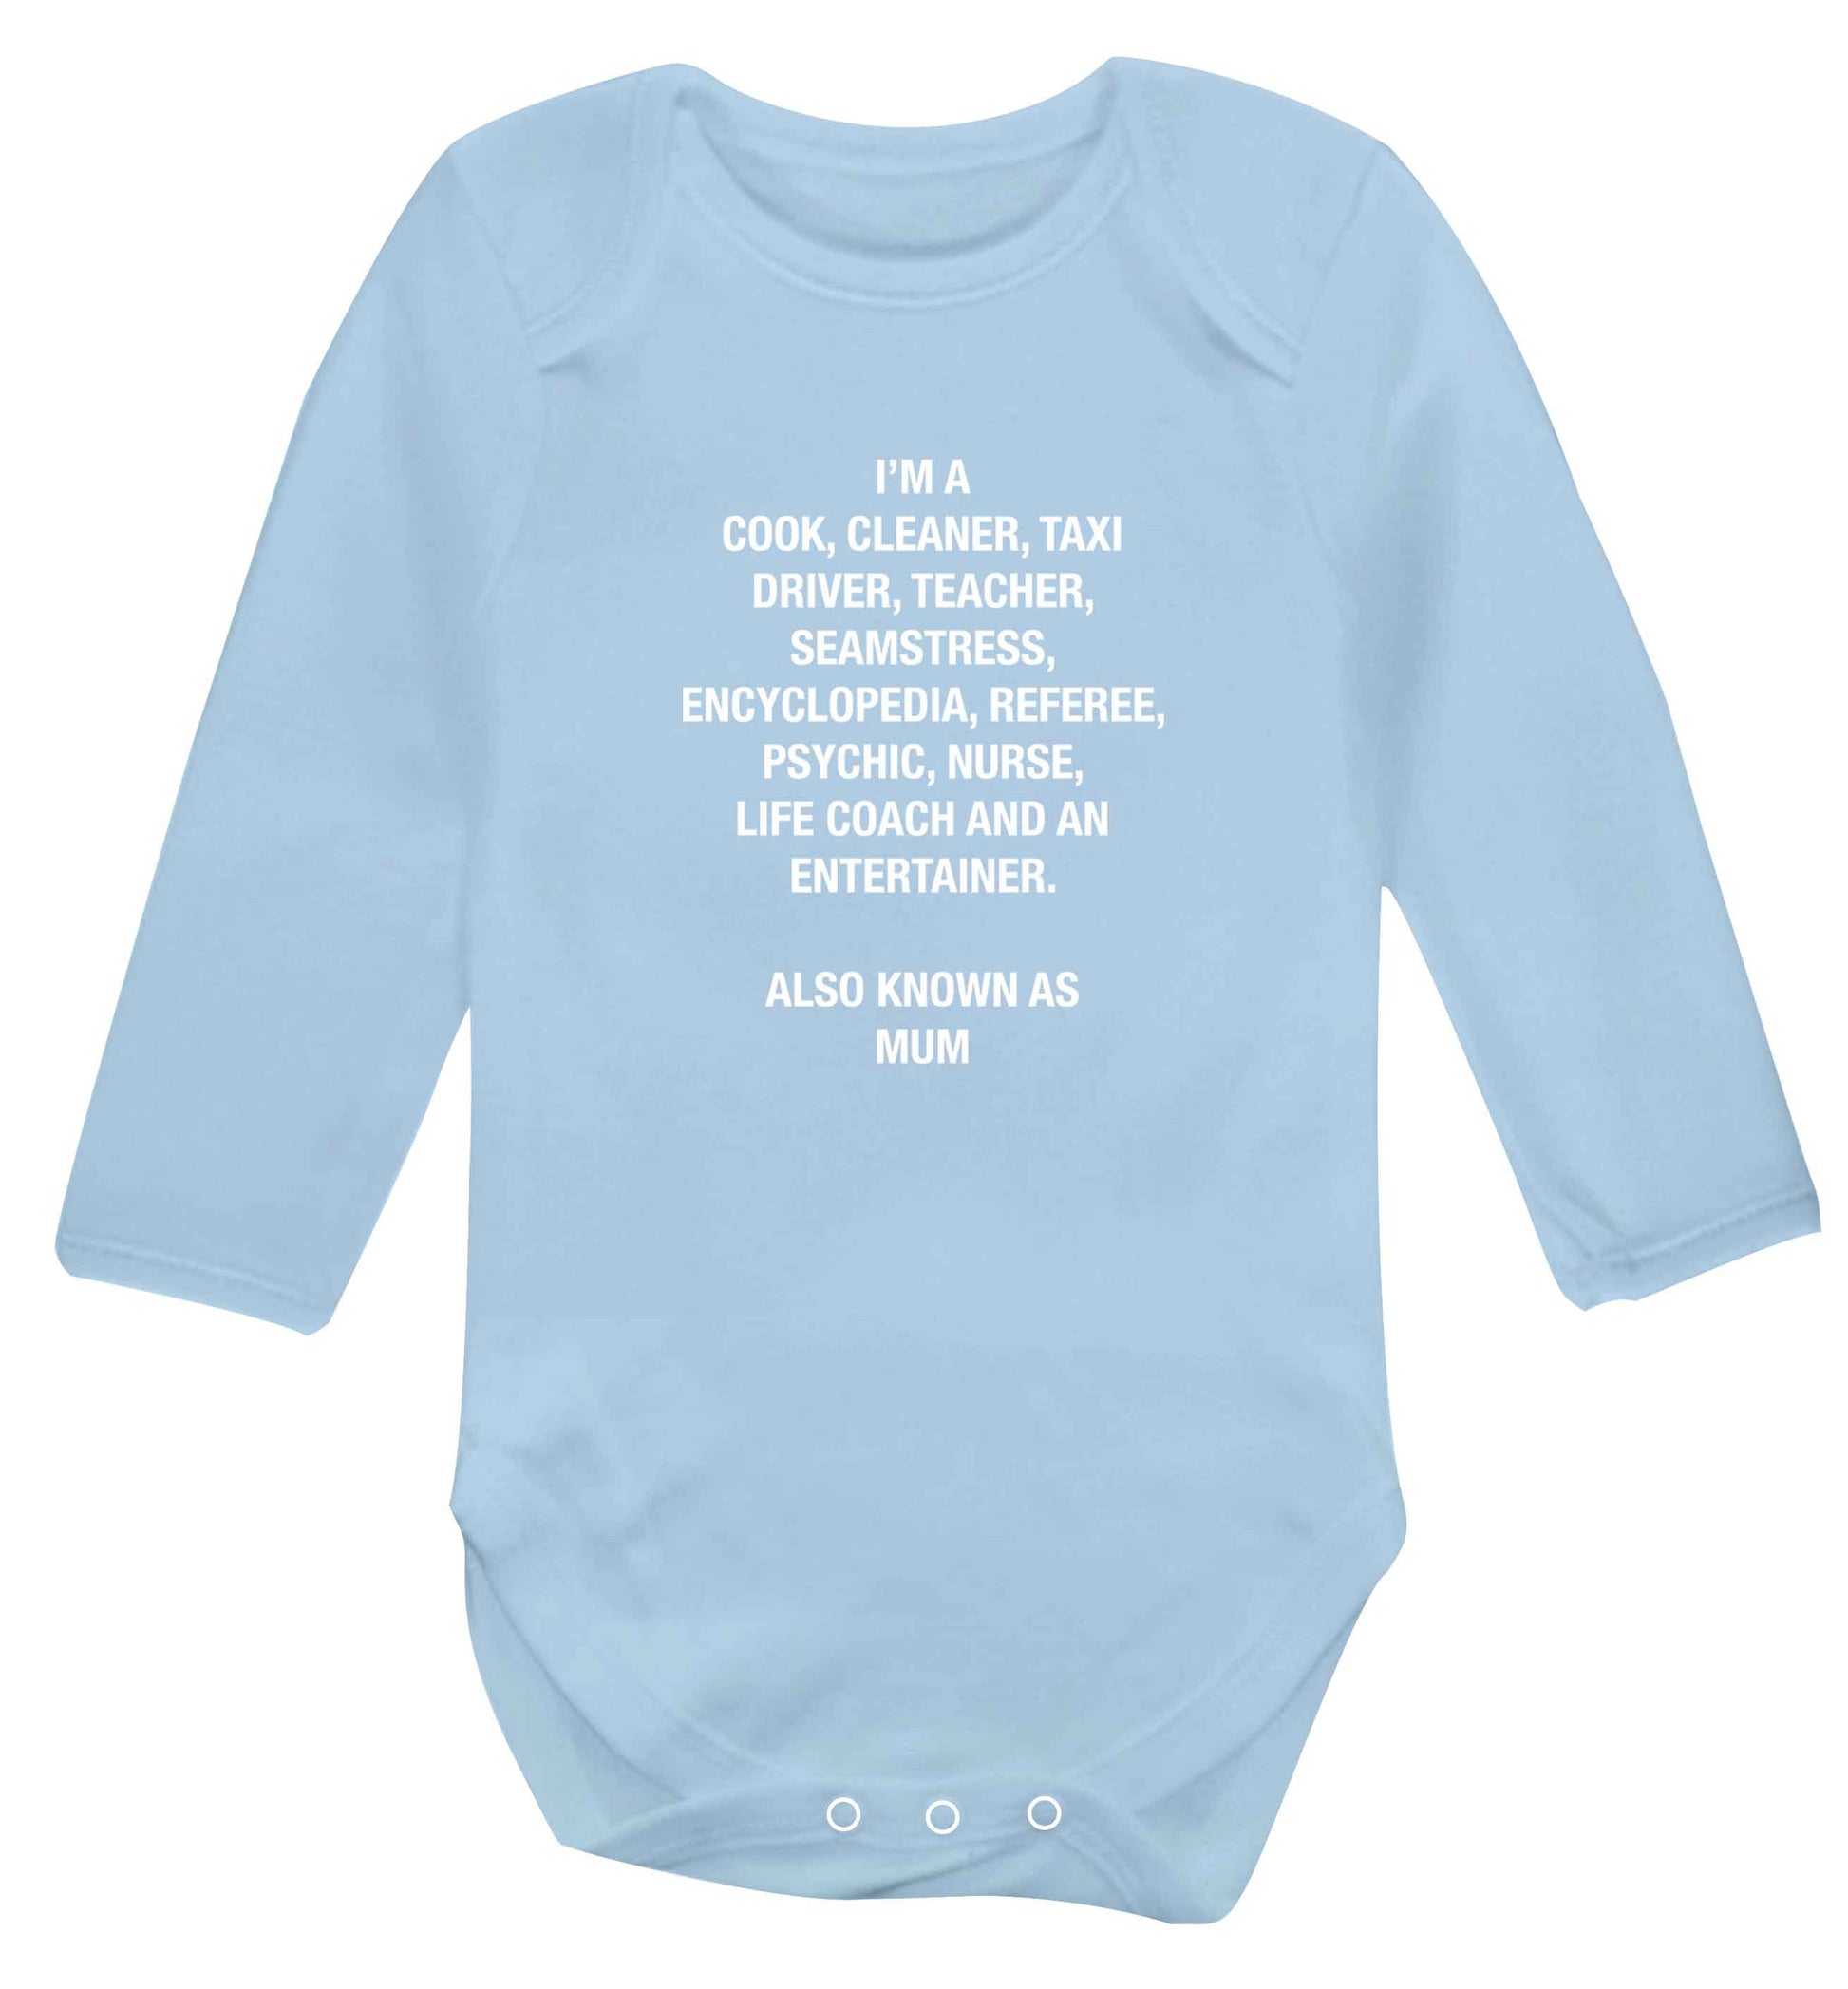 Funny gifts for your mum on mother's dayor her birthday! Mum, cook, cleaner, taxi driver, teacher, seamstress, encyclopedia, referee, psychic, nurse, life coach and entertainer baby vest long sleeved pale blue 6-12 months